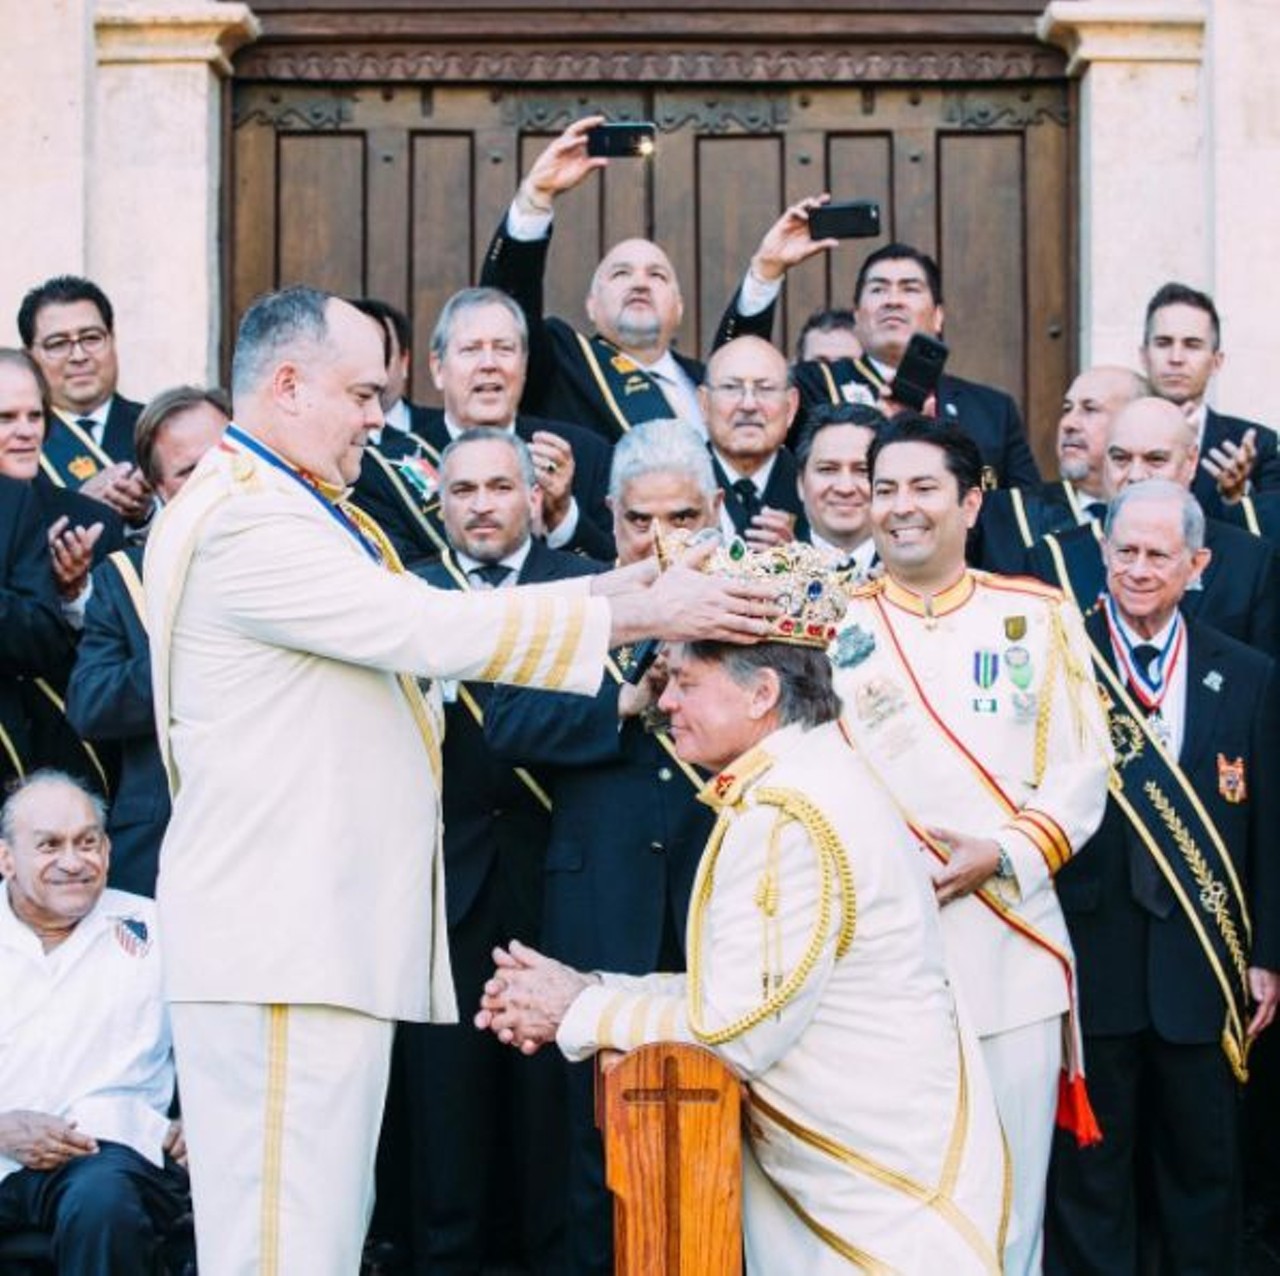 Public Crowning of El Rey Feo
5:30-6:30 p.m. April 21 at Main Plaza
How do you show your love for the People&#146;s King? Attend the crowning ceremony! The 69th Rey Feo, Fred Reyes, will take the throne, followed by a celebration with mariachis and folkloricos. Rub elbows with Rey Feo&#146;s royal court, former Reyes Feos and other Fiesta royalty.
Photo via Instagram, fiestasa